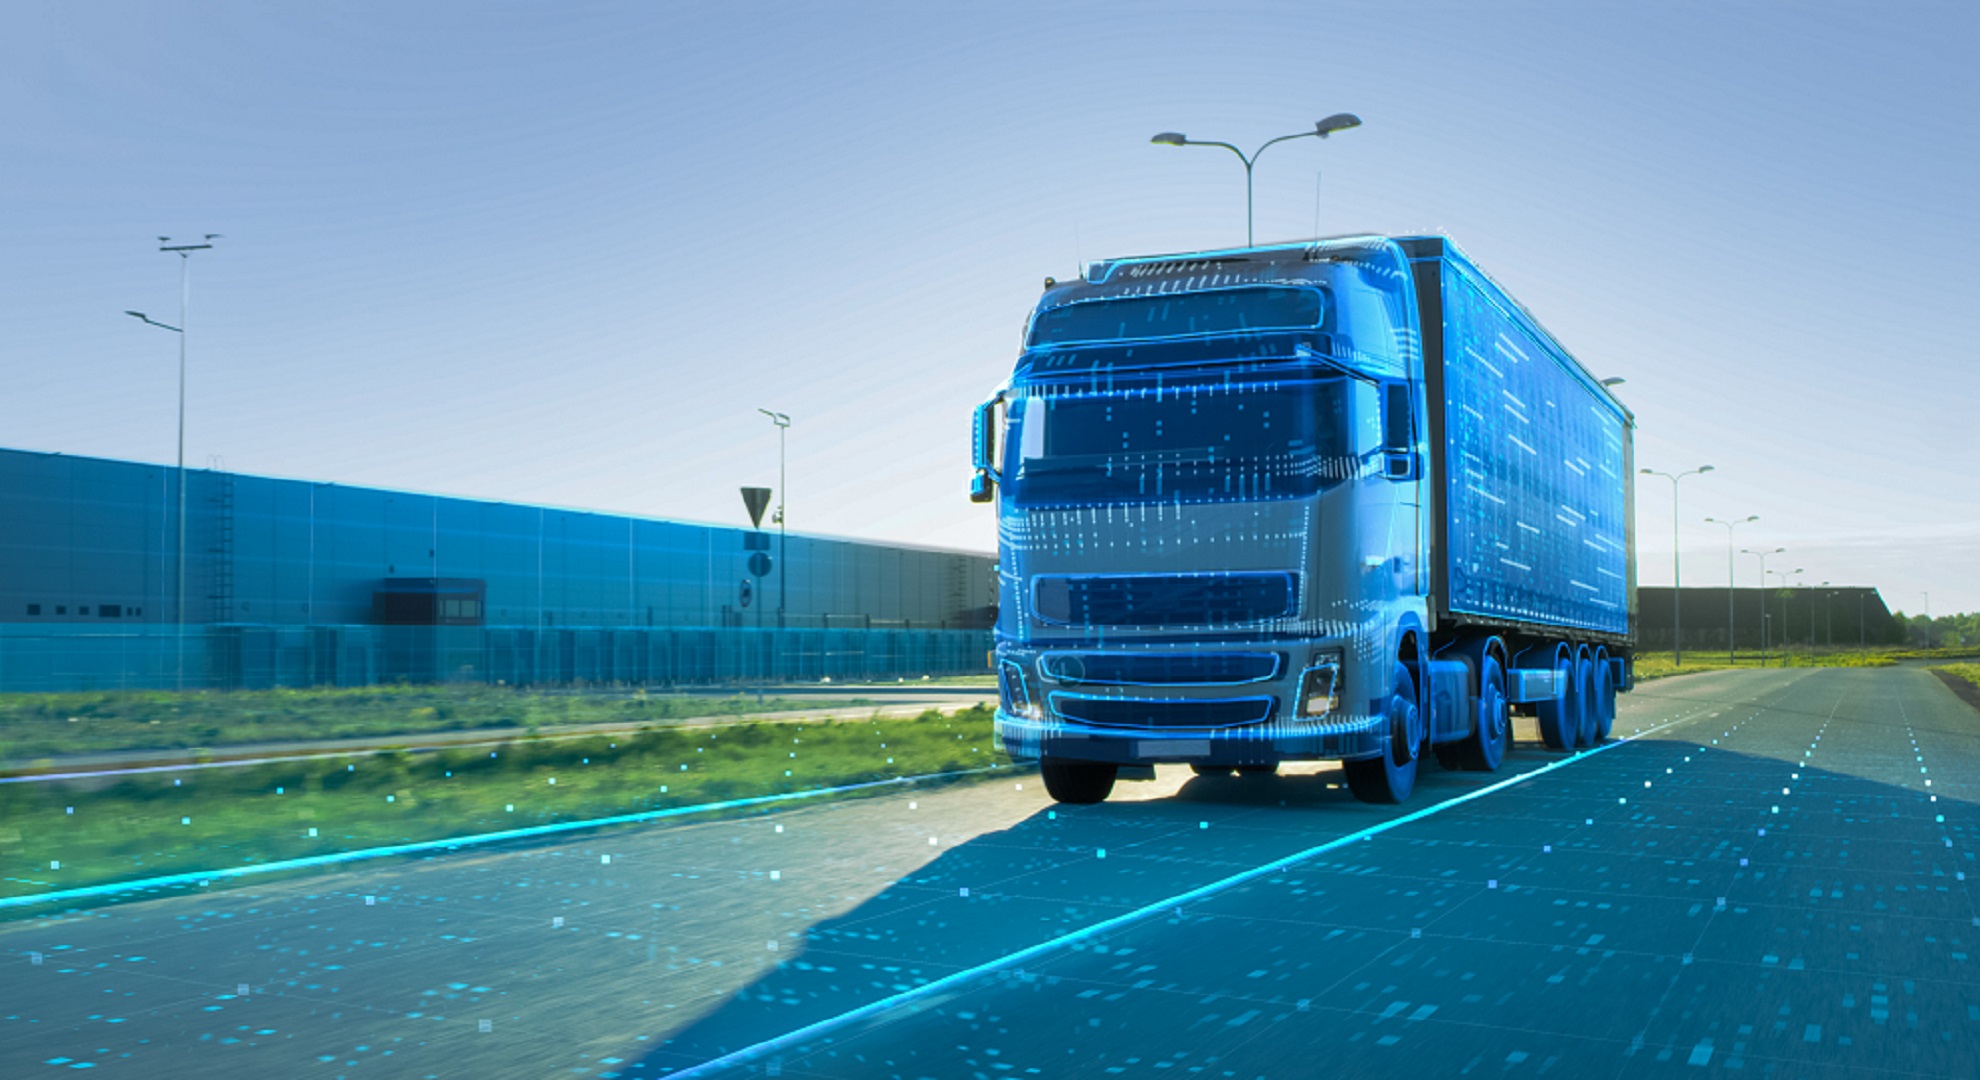 Increased efficiency and sustainability happen through logistics research